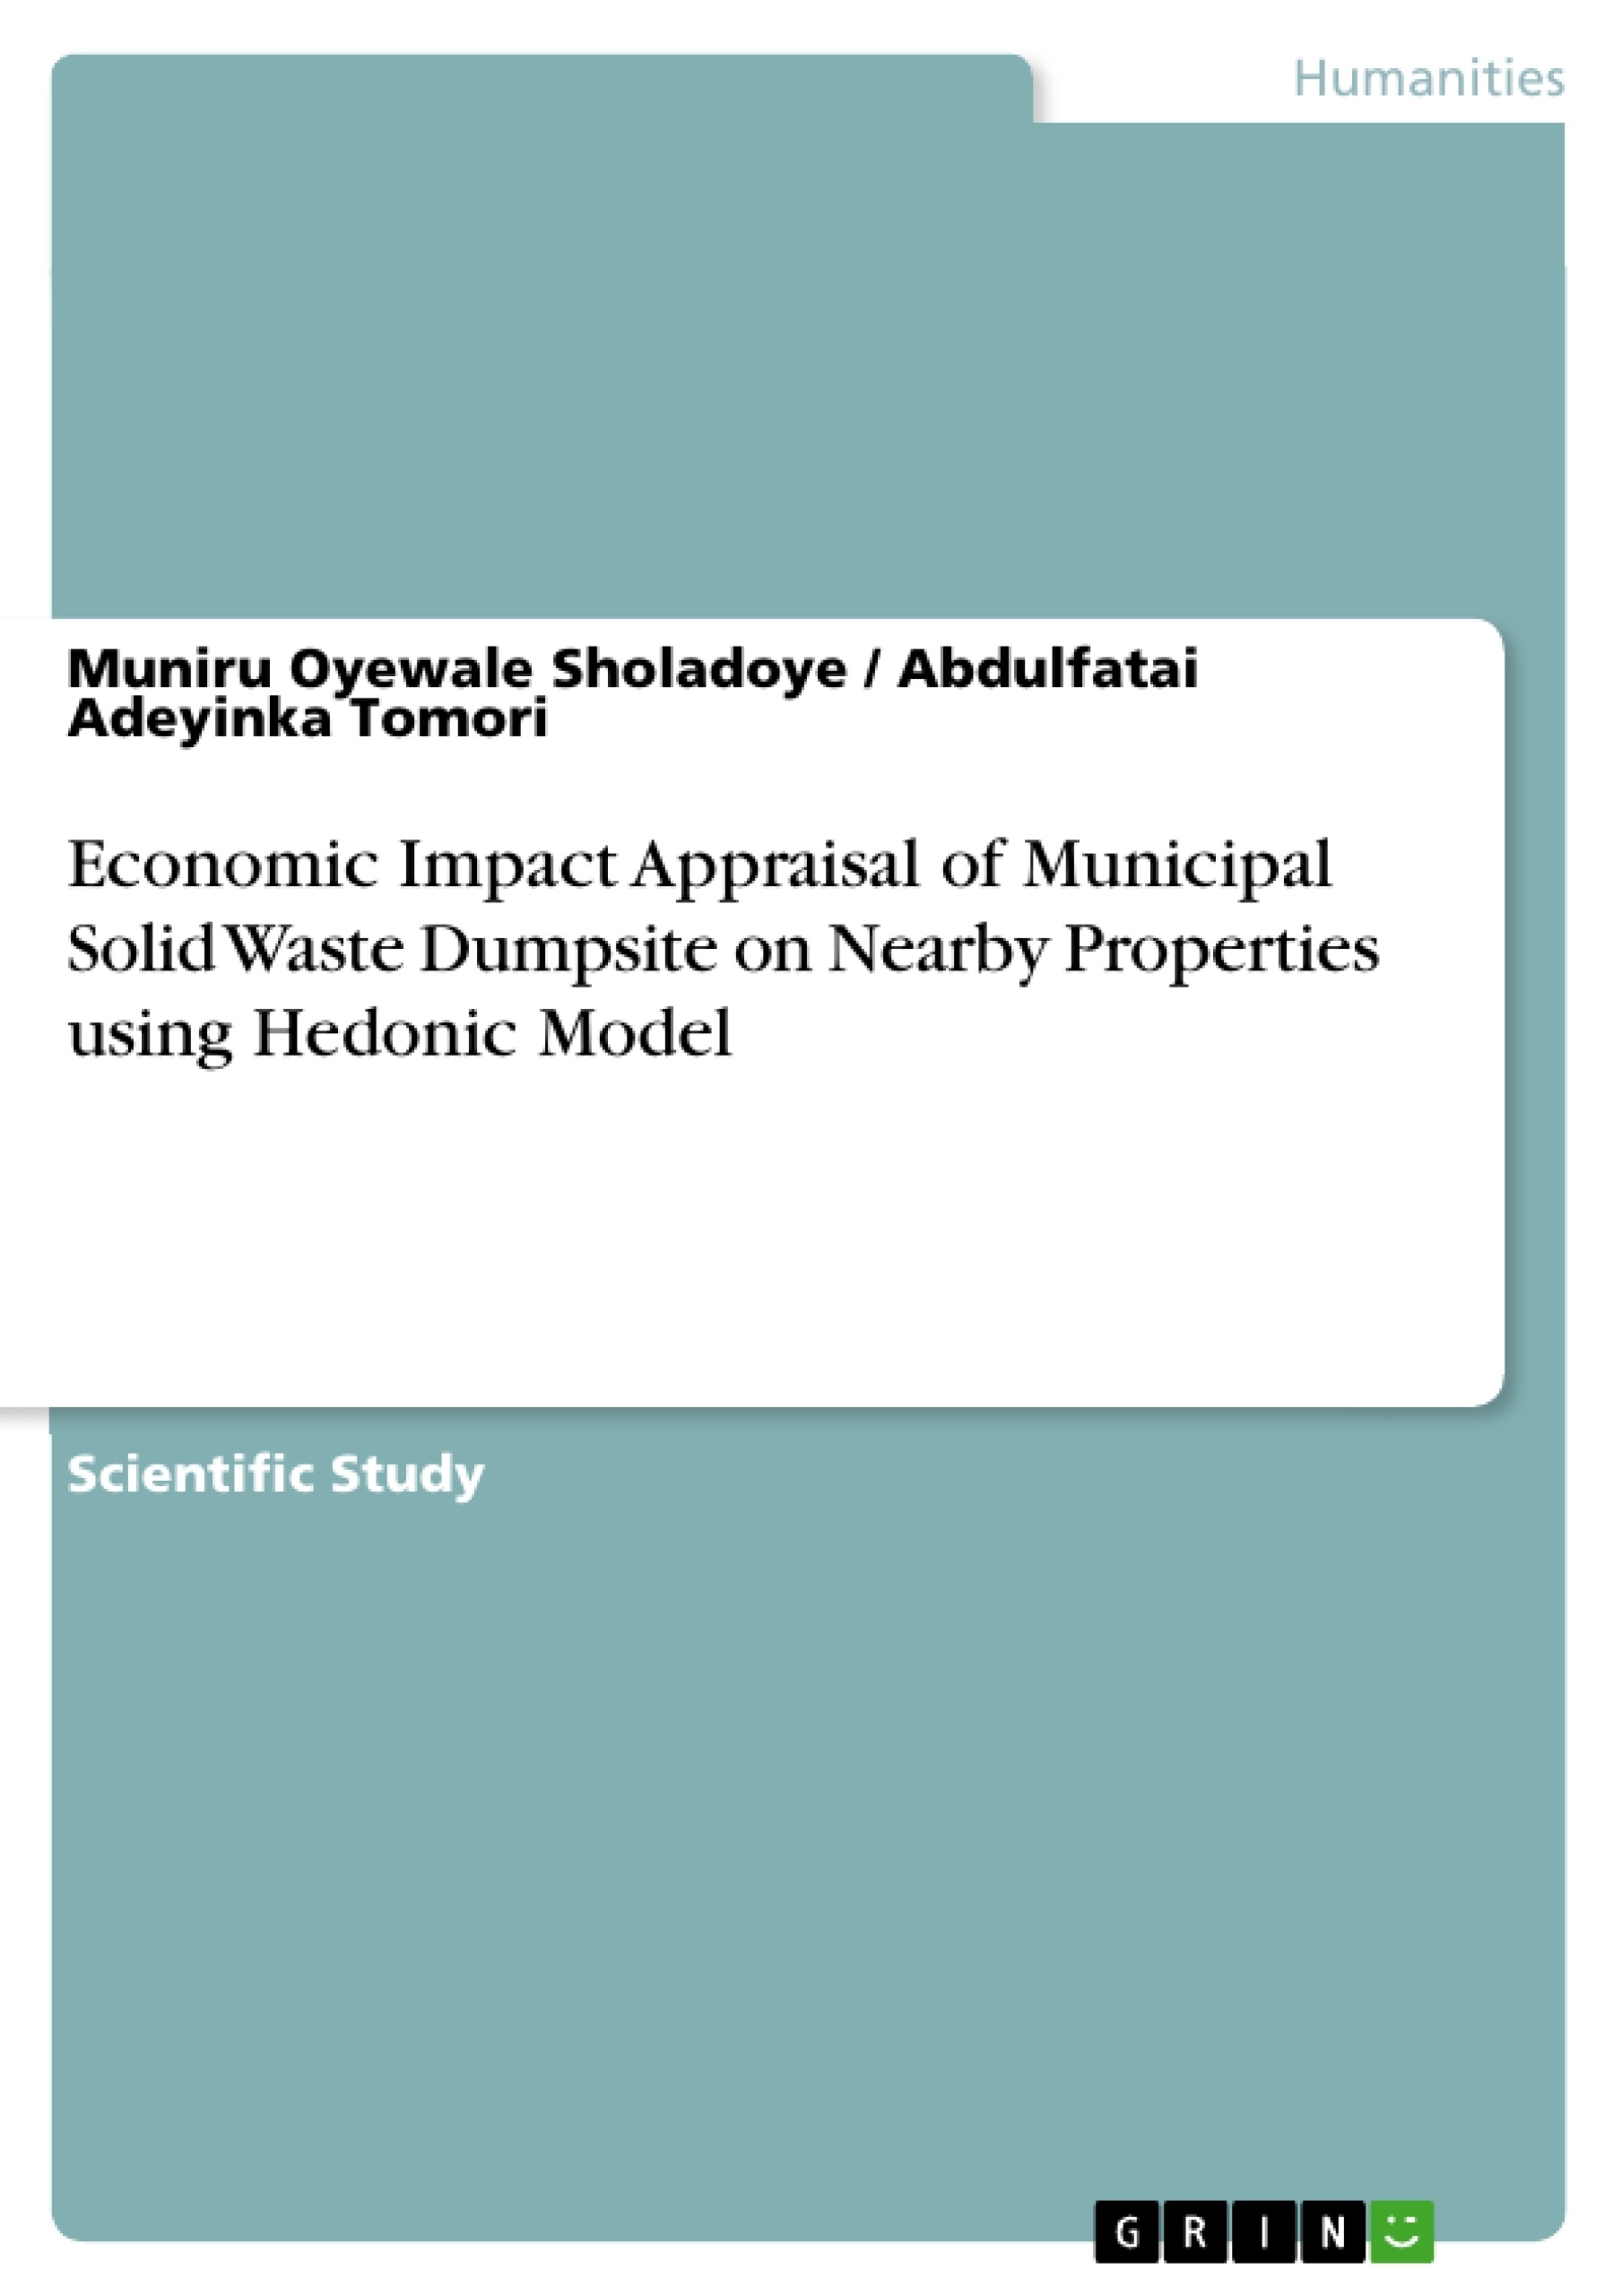 Title: Economic Impact Appraisal of Municipal Solid Waste Dumpsite on Nearby Properties using Hedonic Model